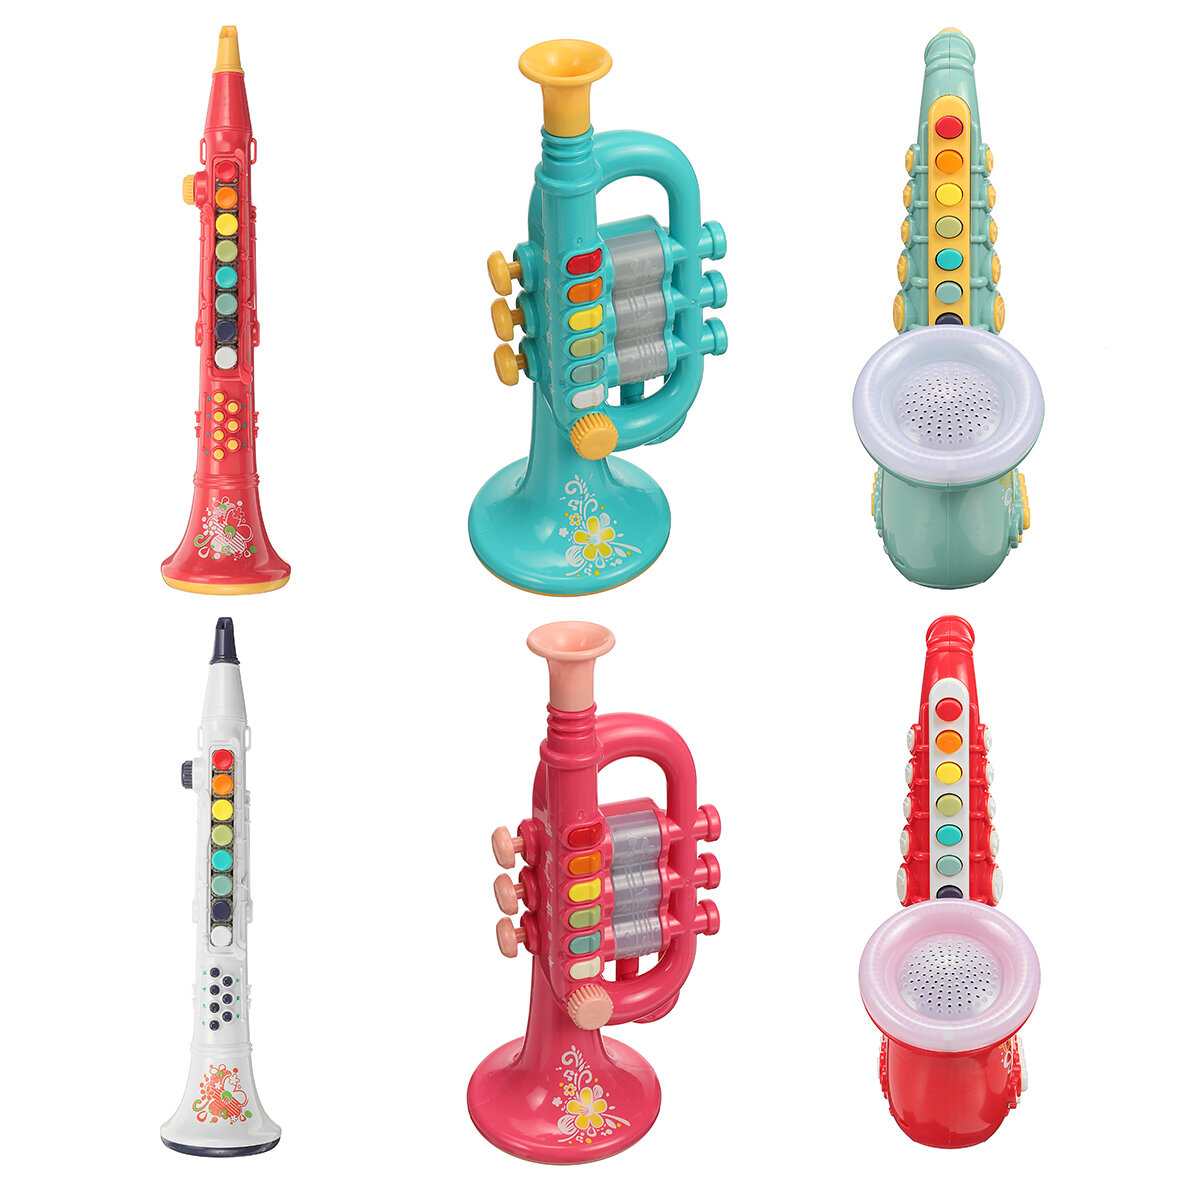 8 Tones Children Toys SaxophoneTrumpet Simulation Musical Instrument Toys for Children's Musical Instrument Toy Gifts